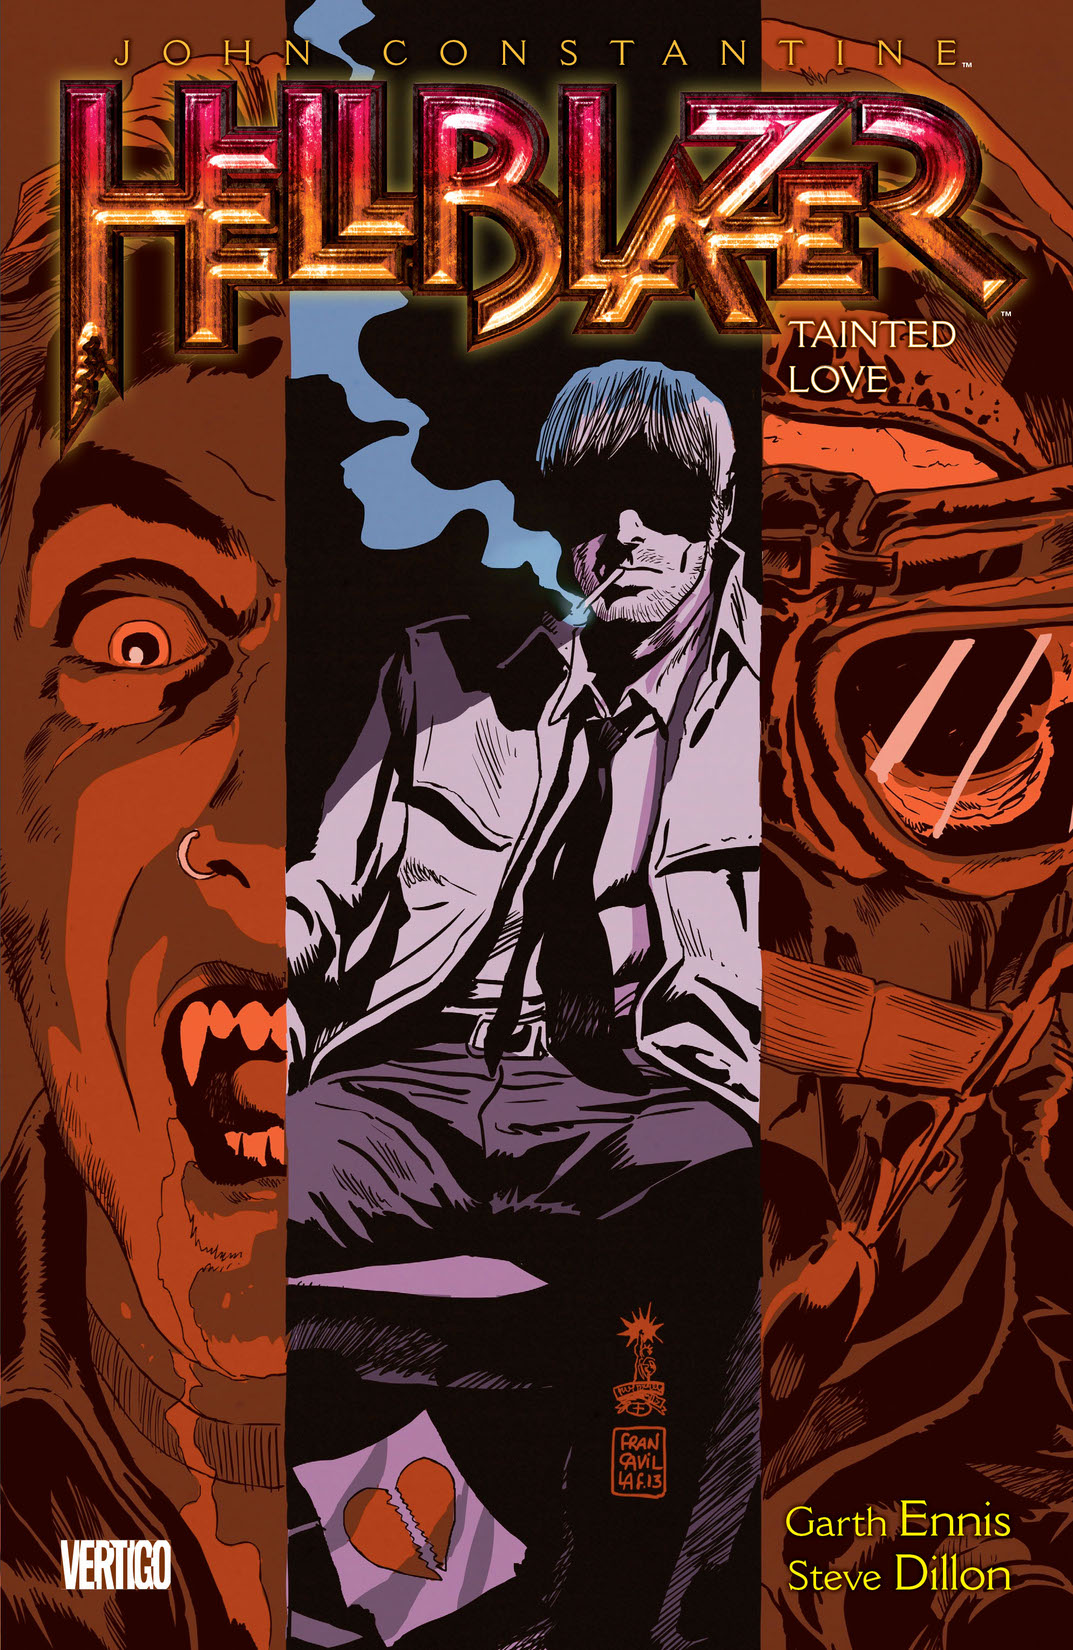 John Constantine, Hellblazer Vol. 7: Tainted Love preview images